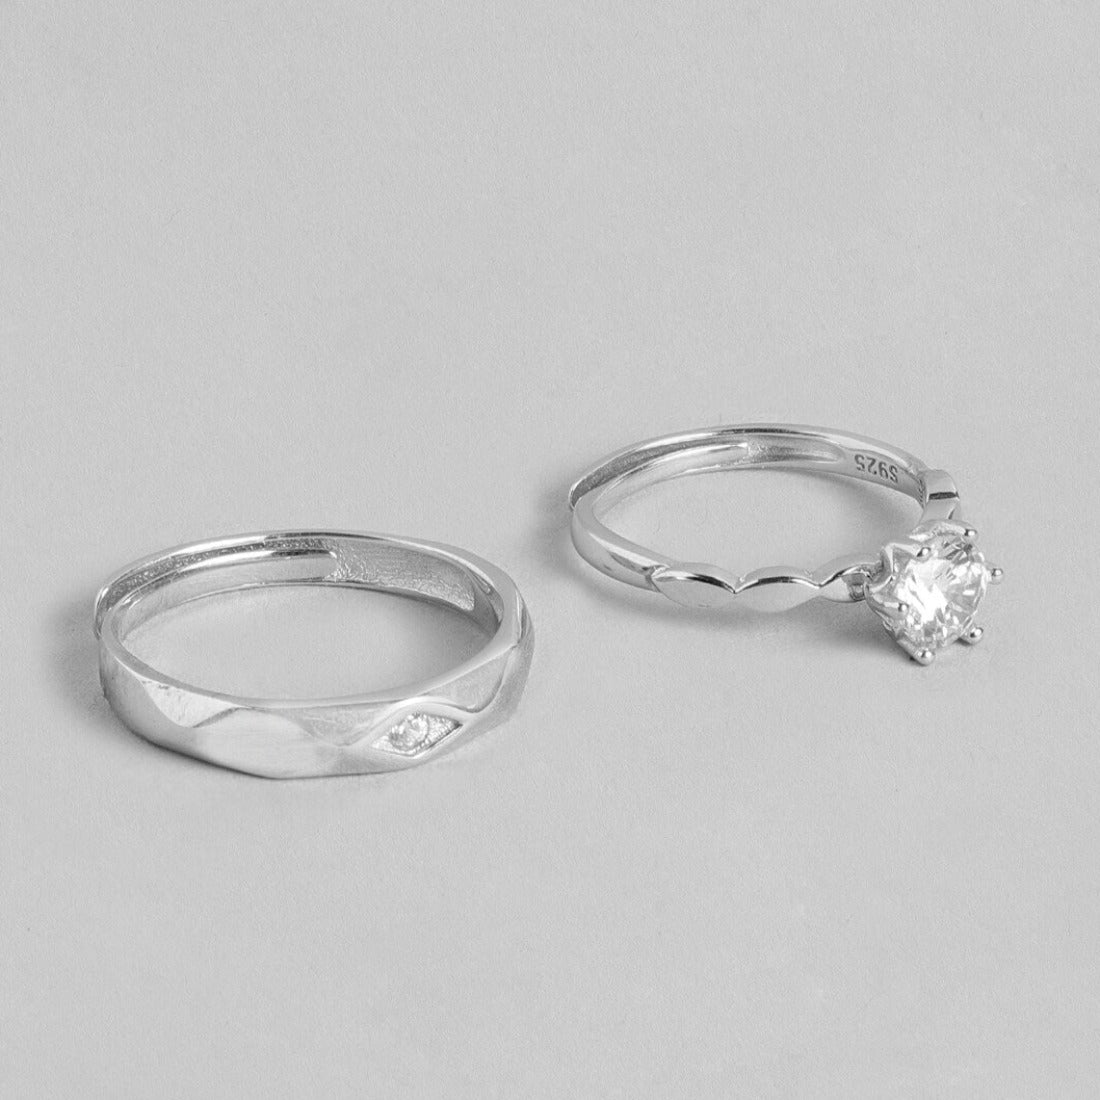 Classic Couples 925 Silver Rings (Adjustable)